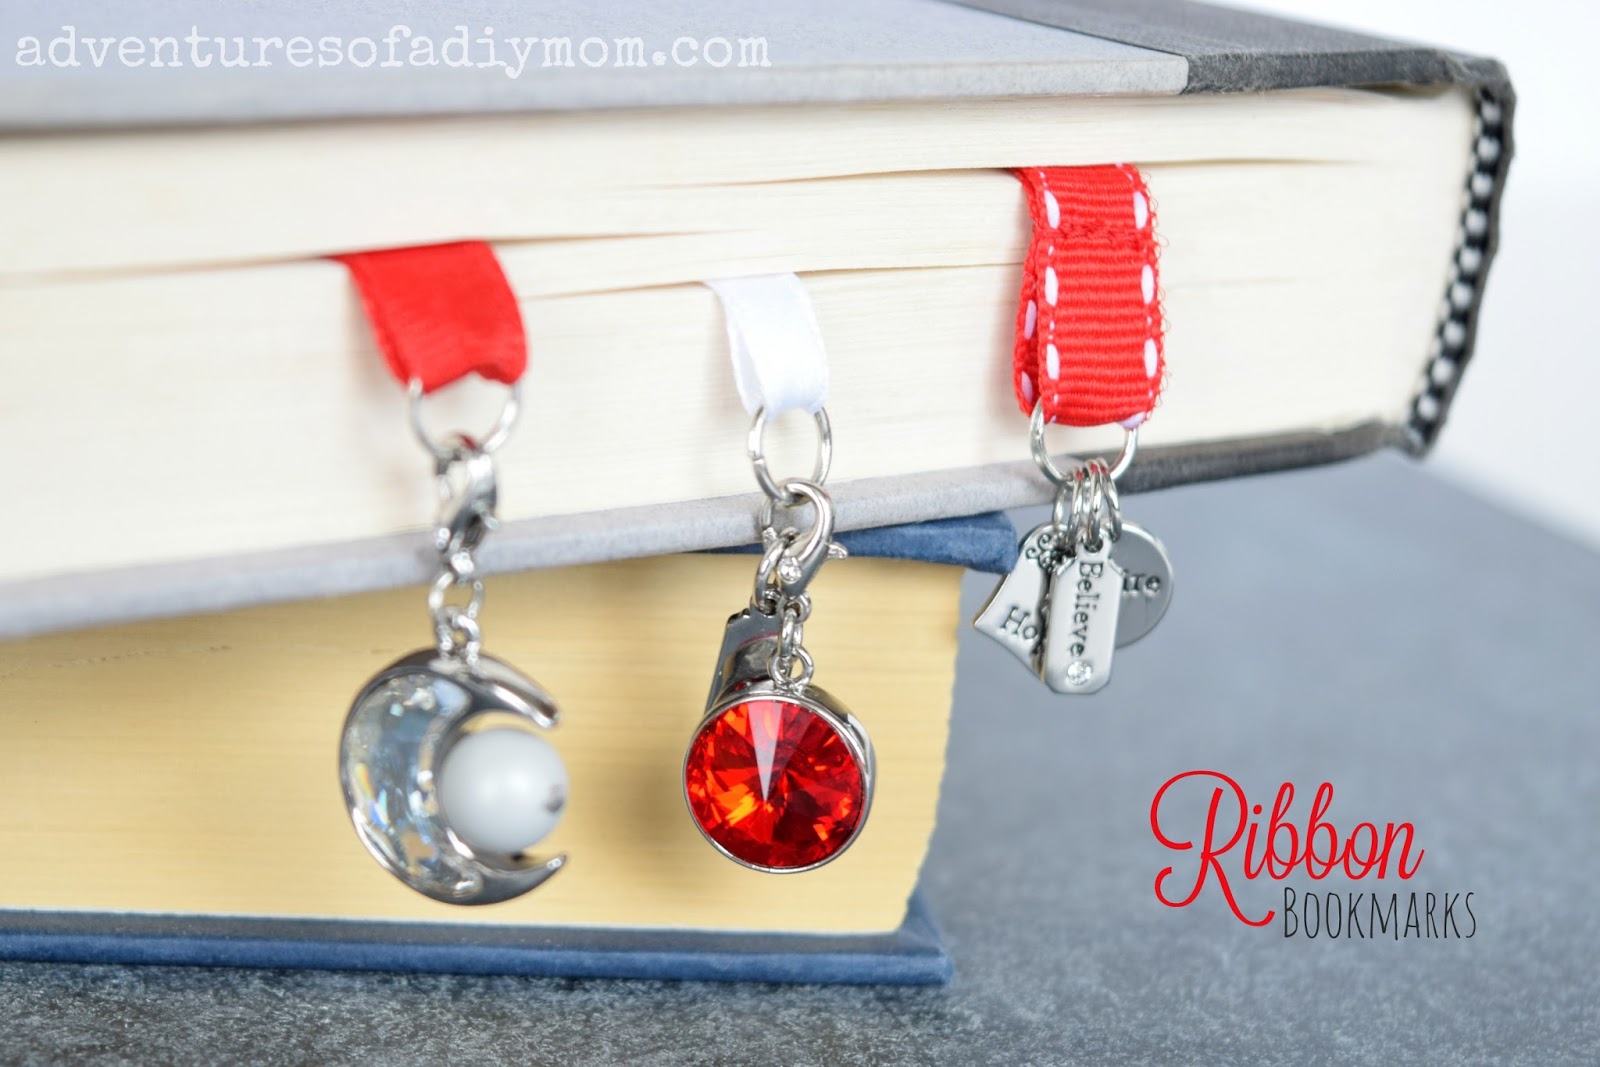 How to Make Ribbon Bookmarks with Charms - Adventures of a DIY Mom